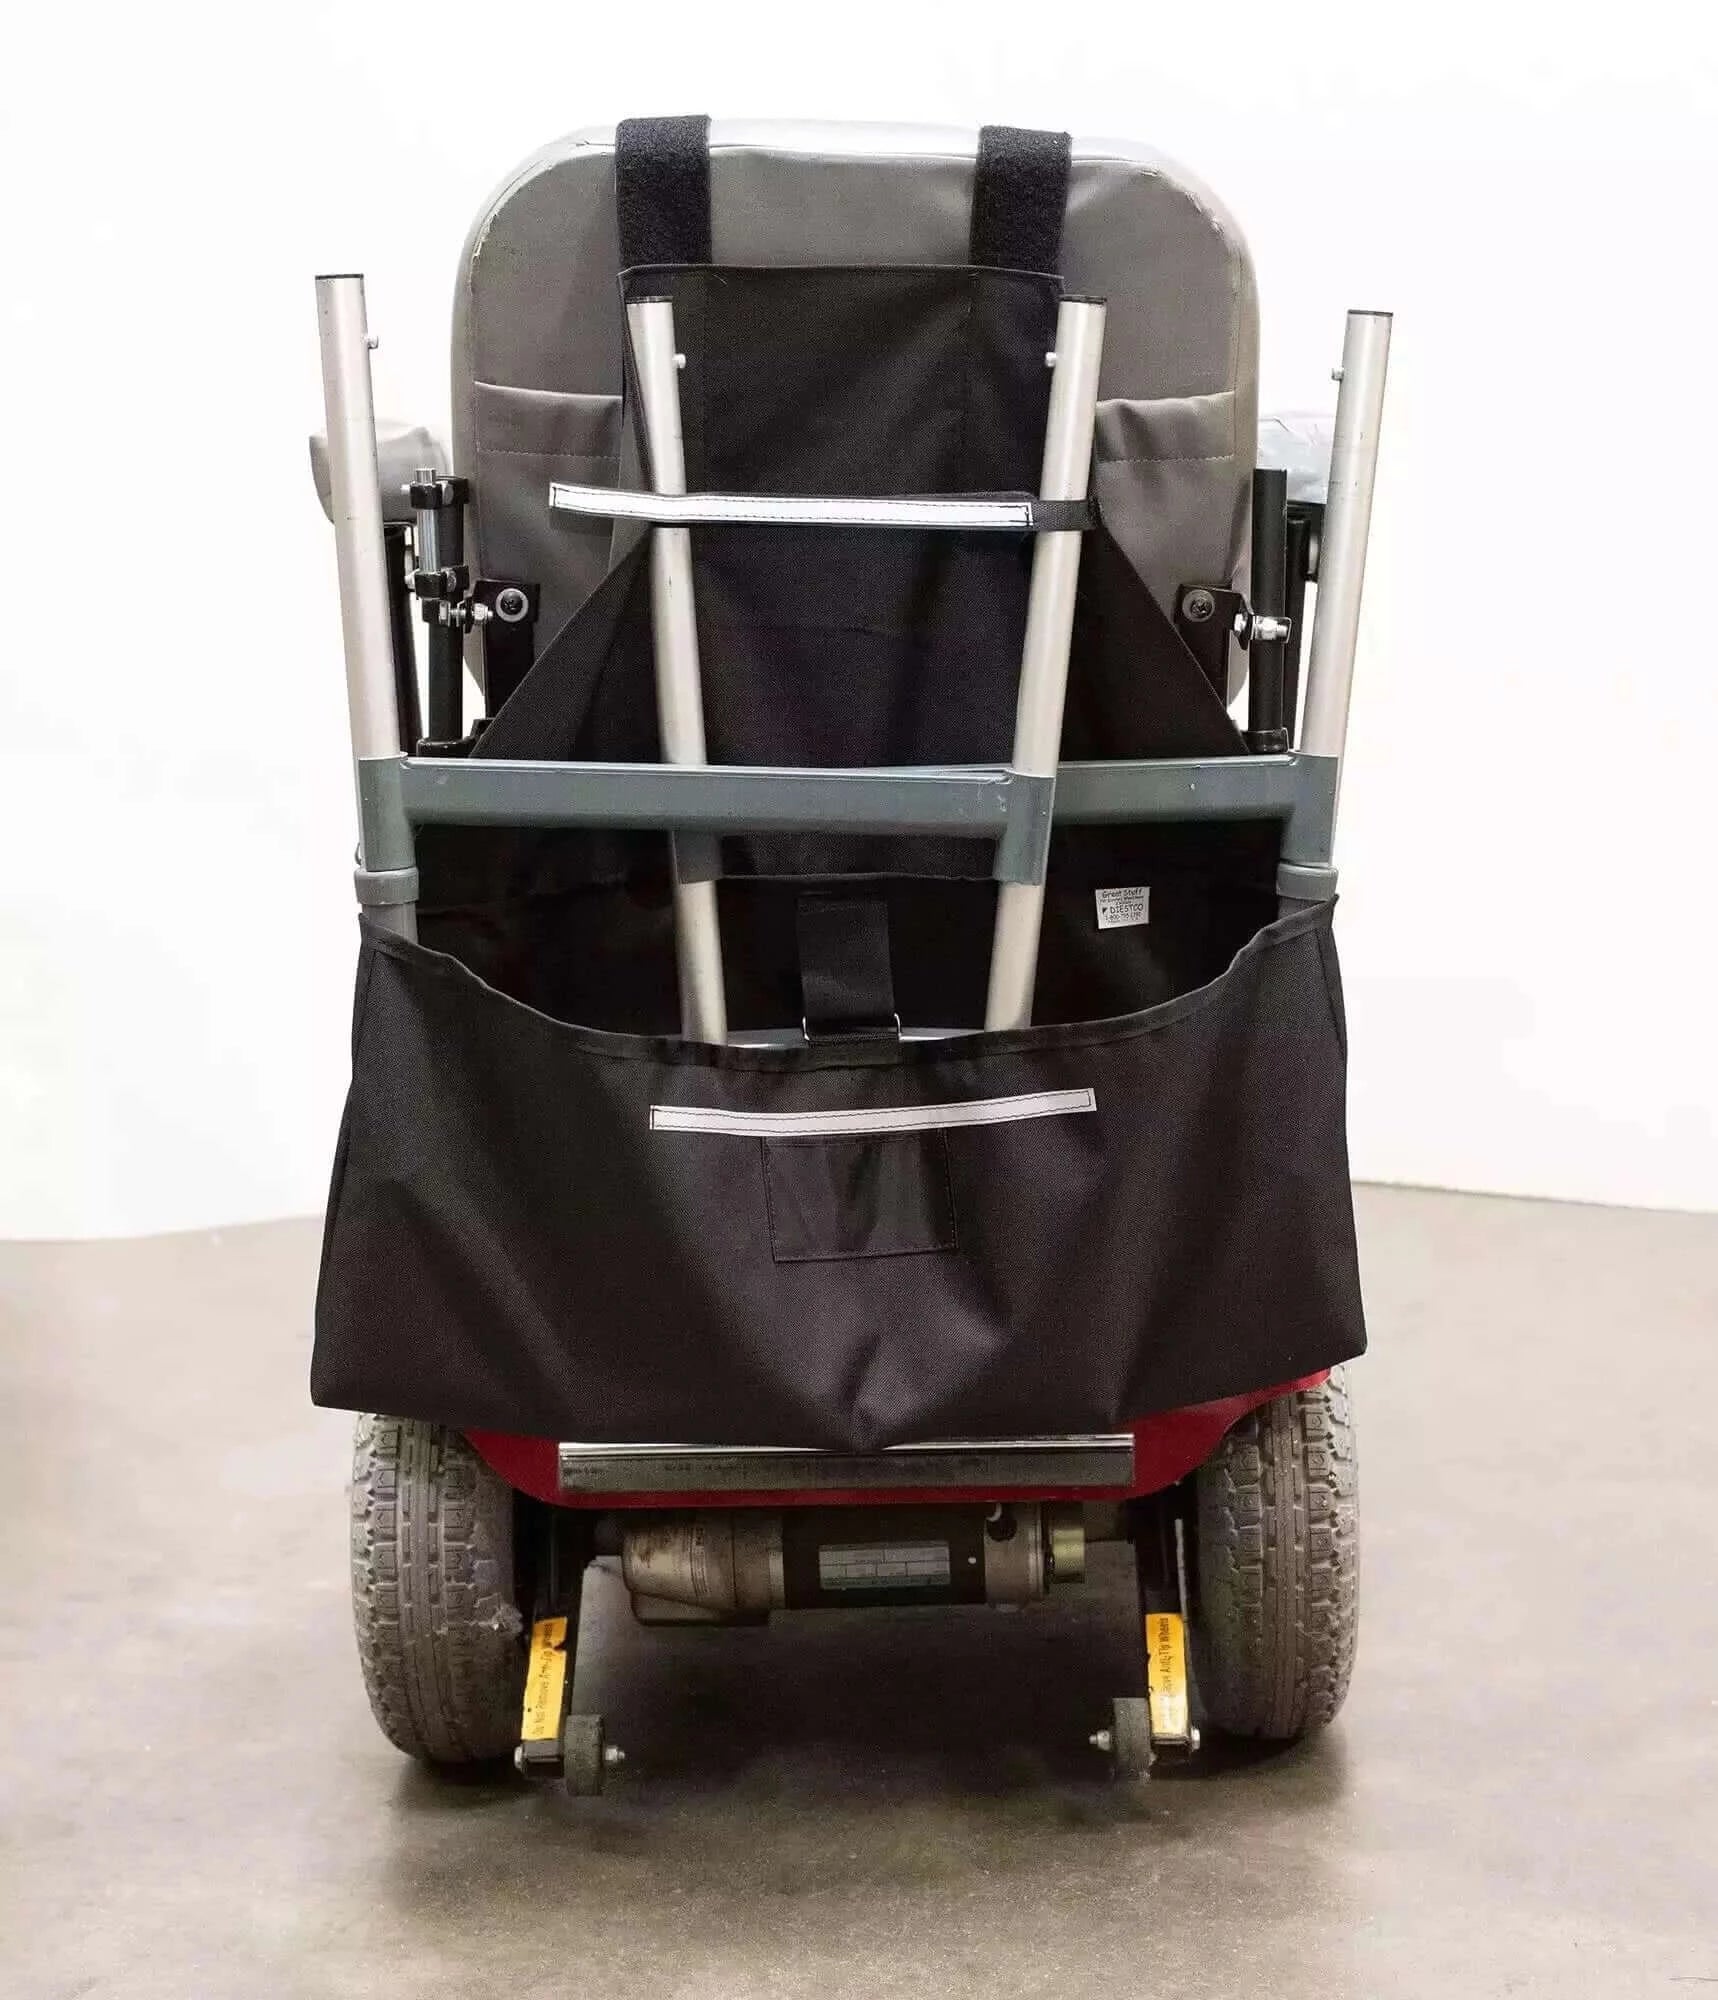 back view of a motorized scooter with a walker holder on the back of it